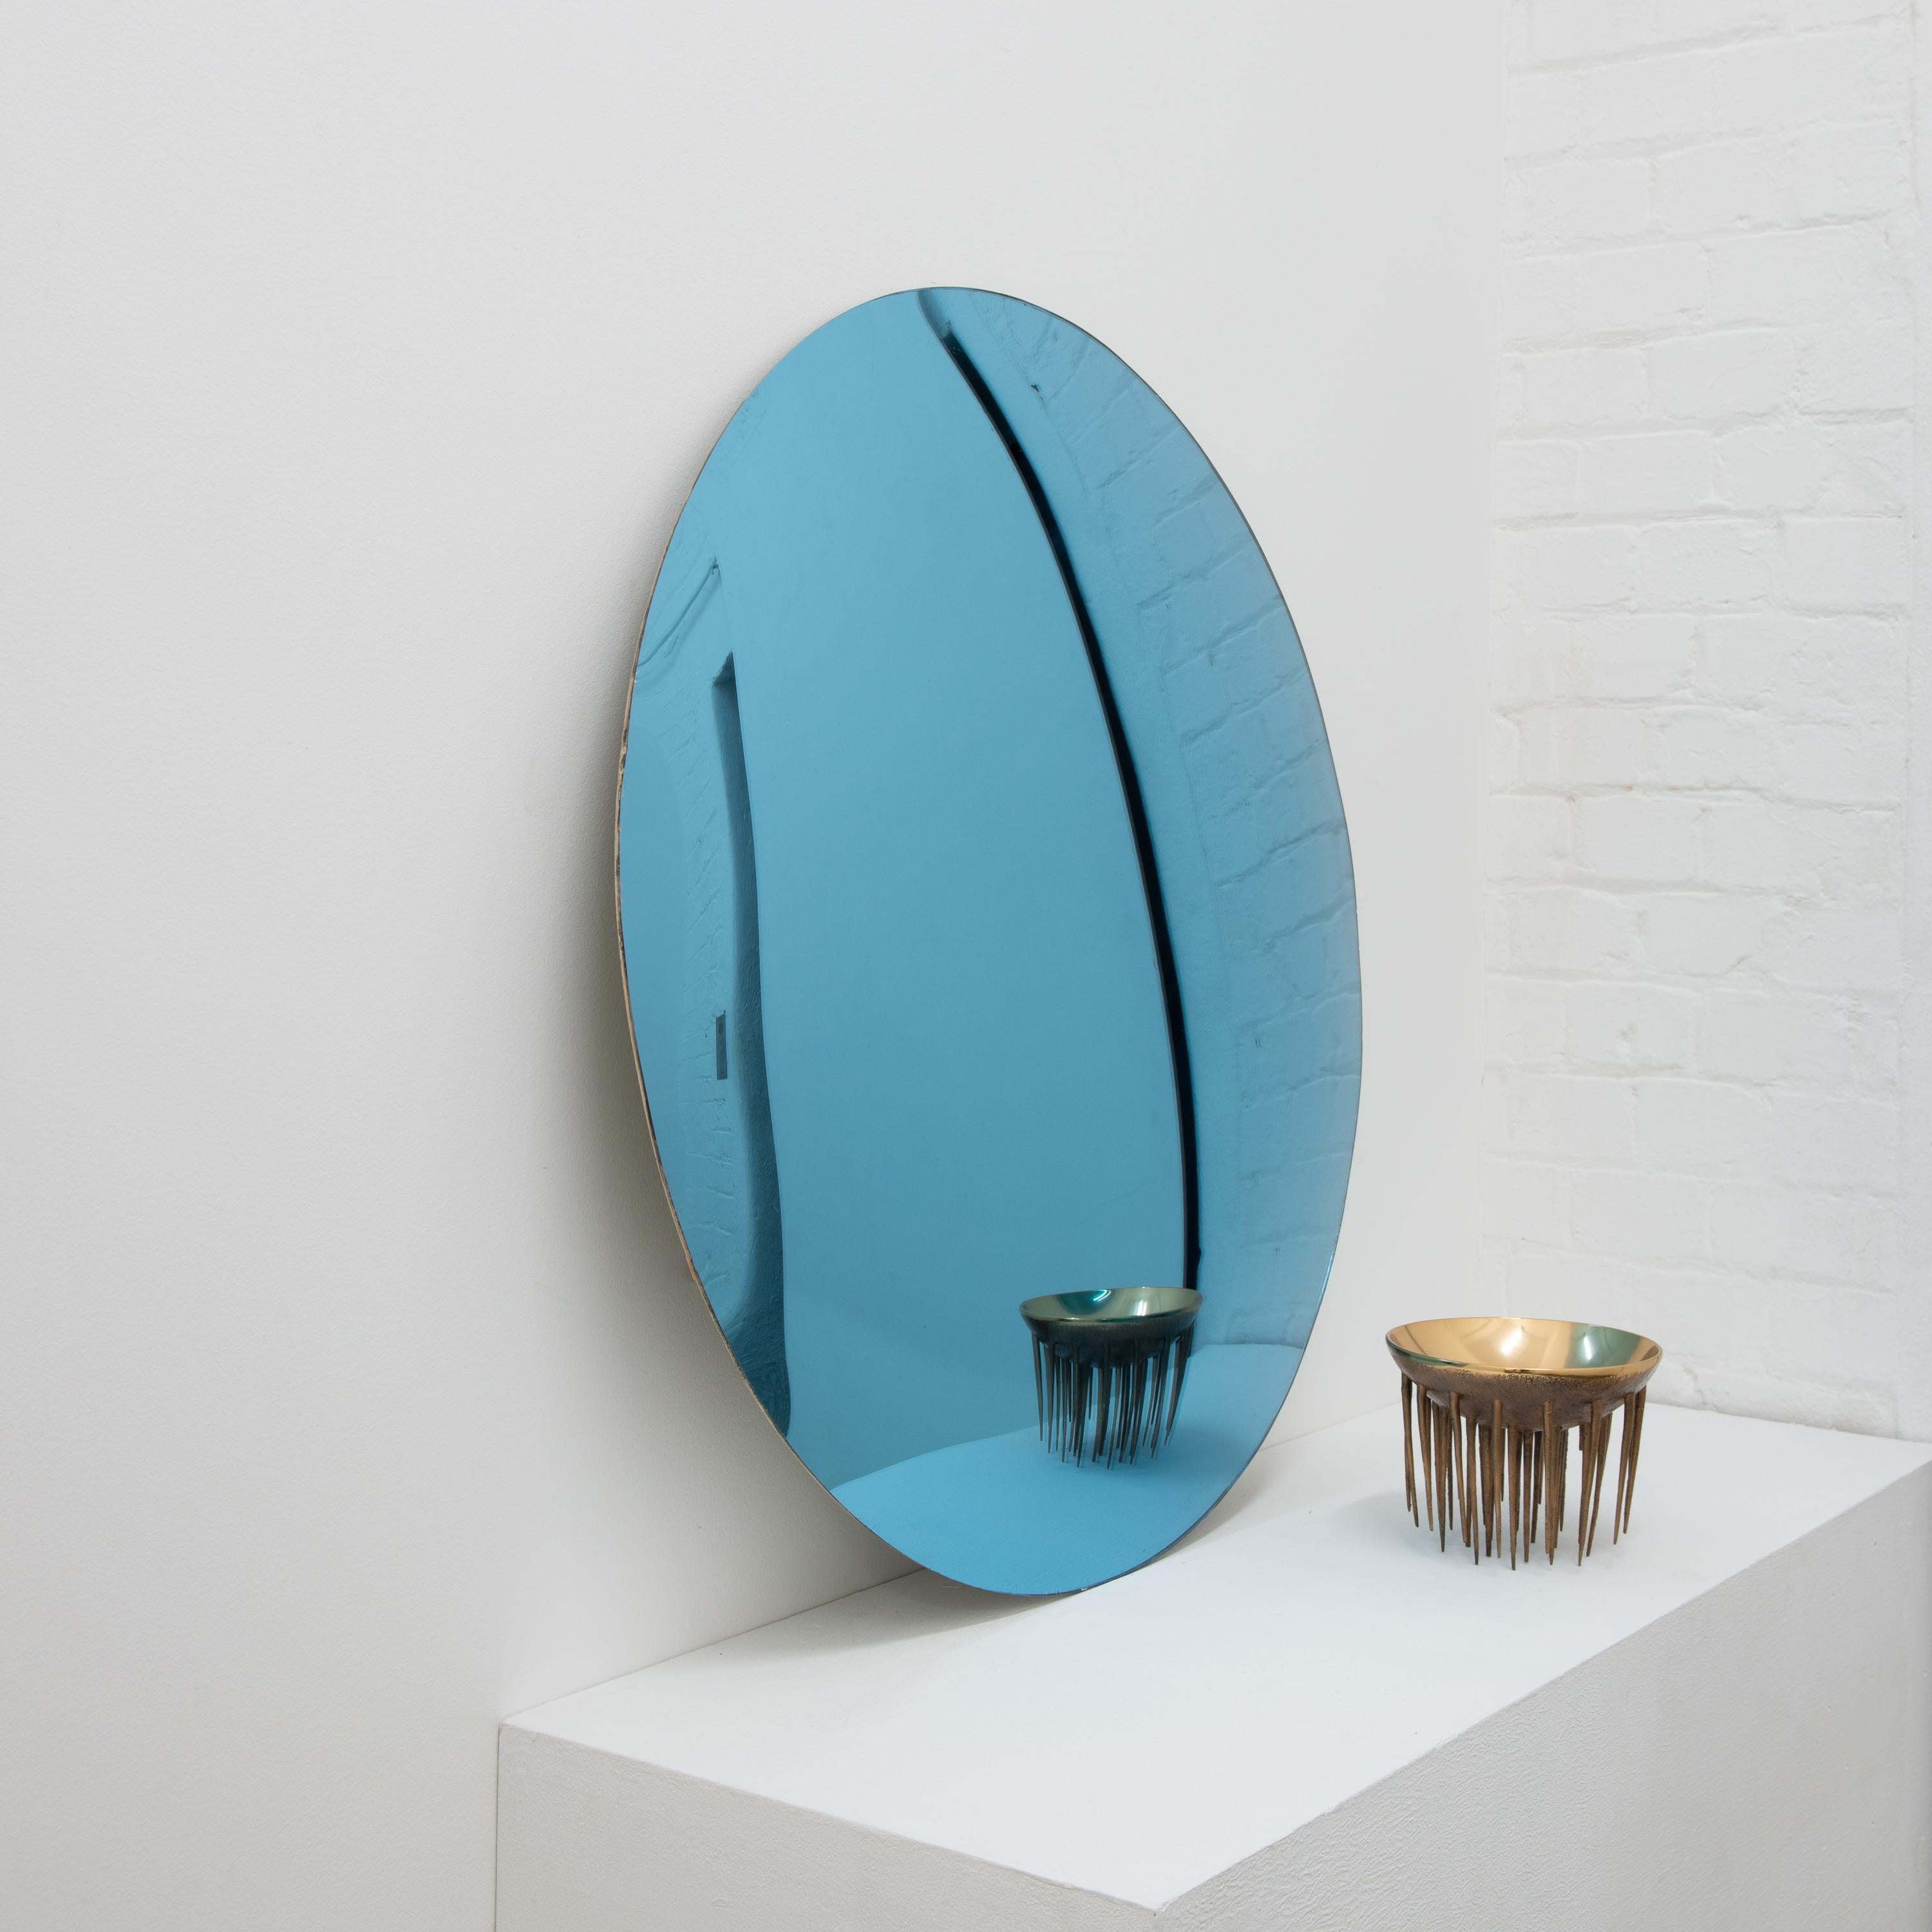 Orbis Convex Blue Handcrafted Frameless Contemporary Round Mirror, Large For Sale 1